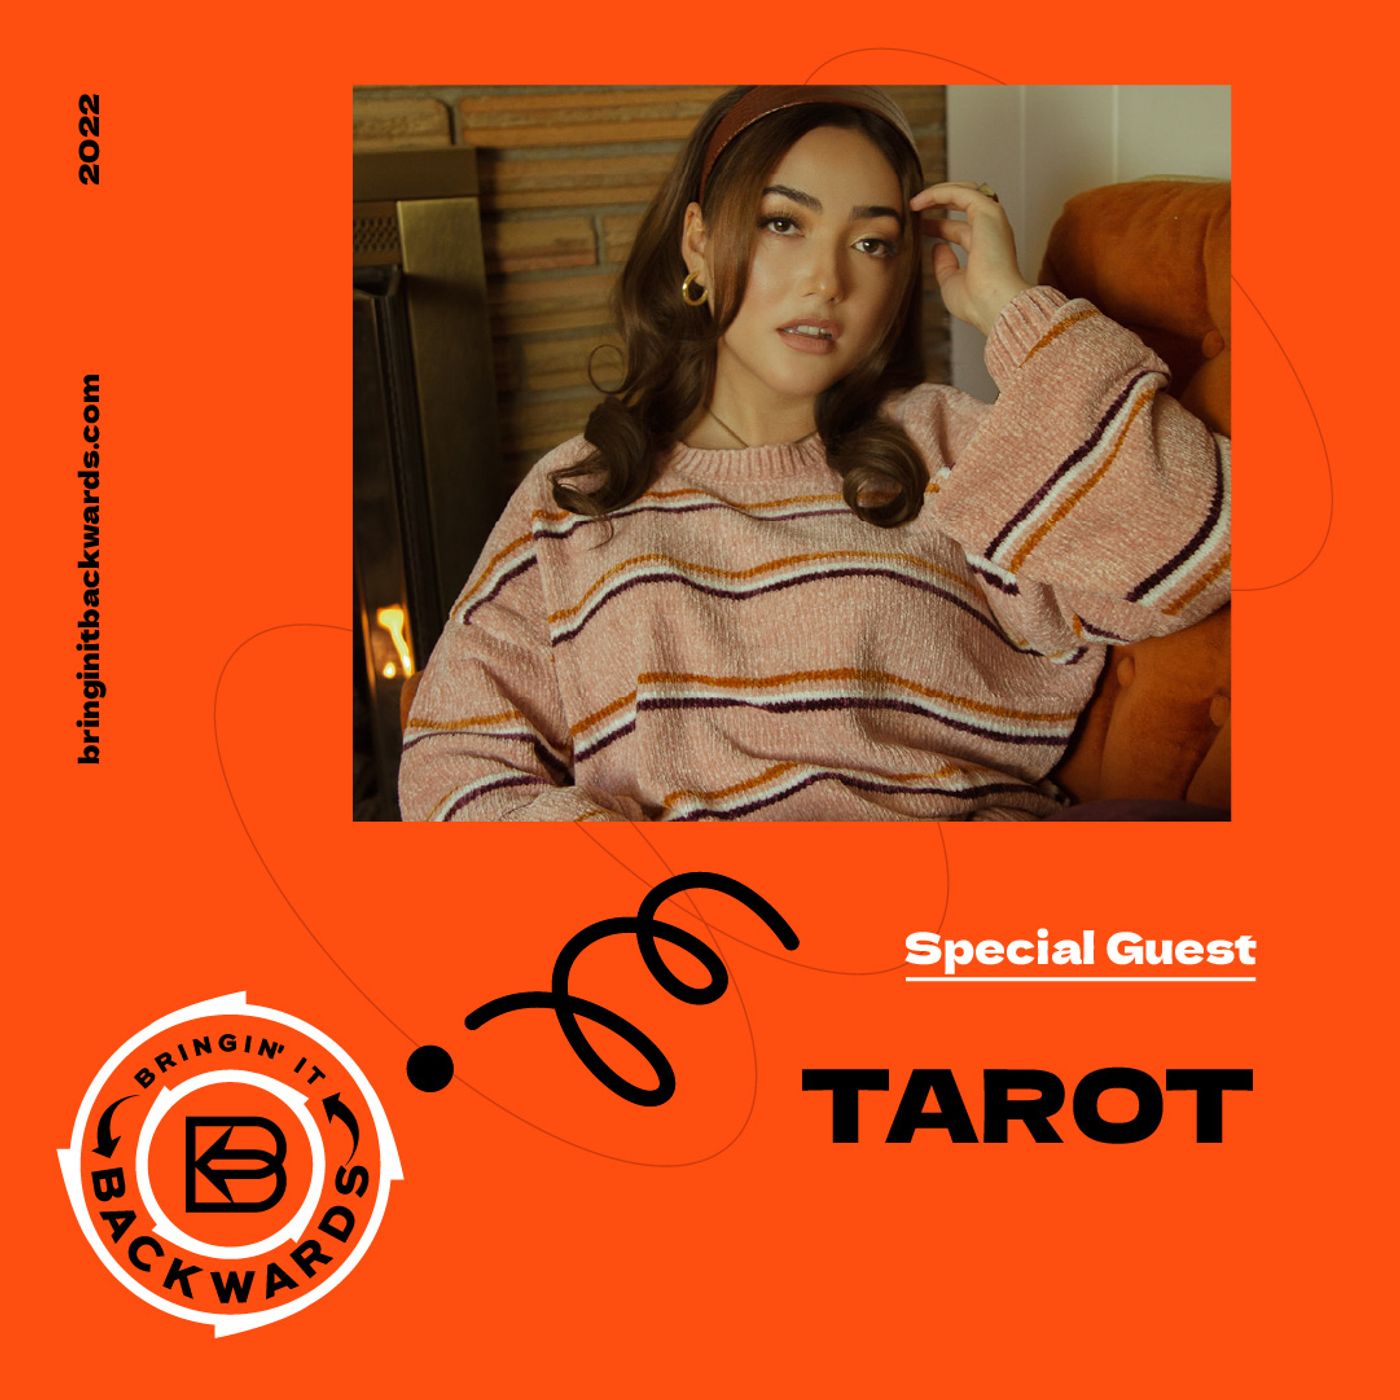 Interview with TAROT